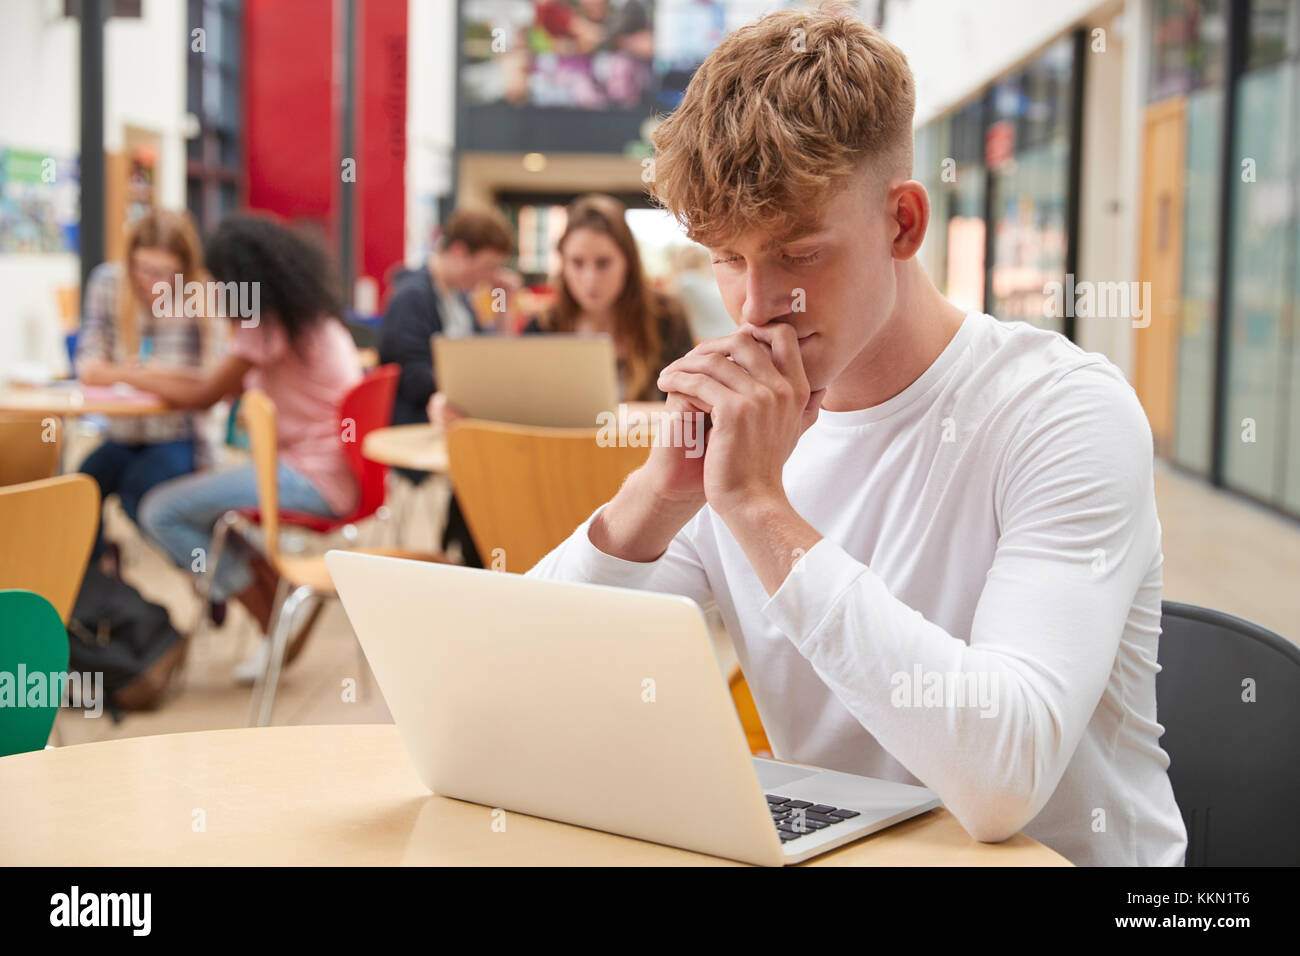 Male Student Working In Communal Area Of Busy College Campus Stock Photo